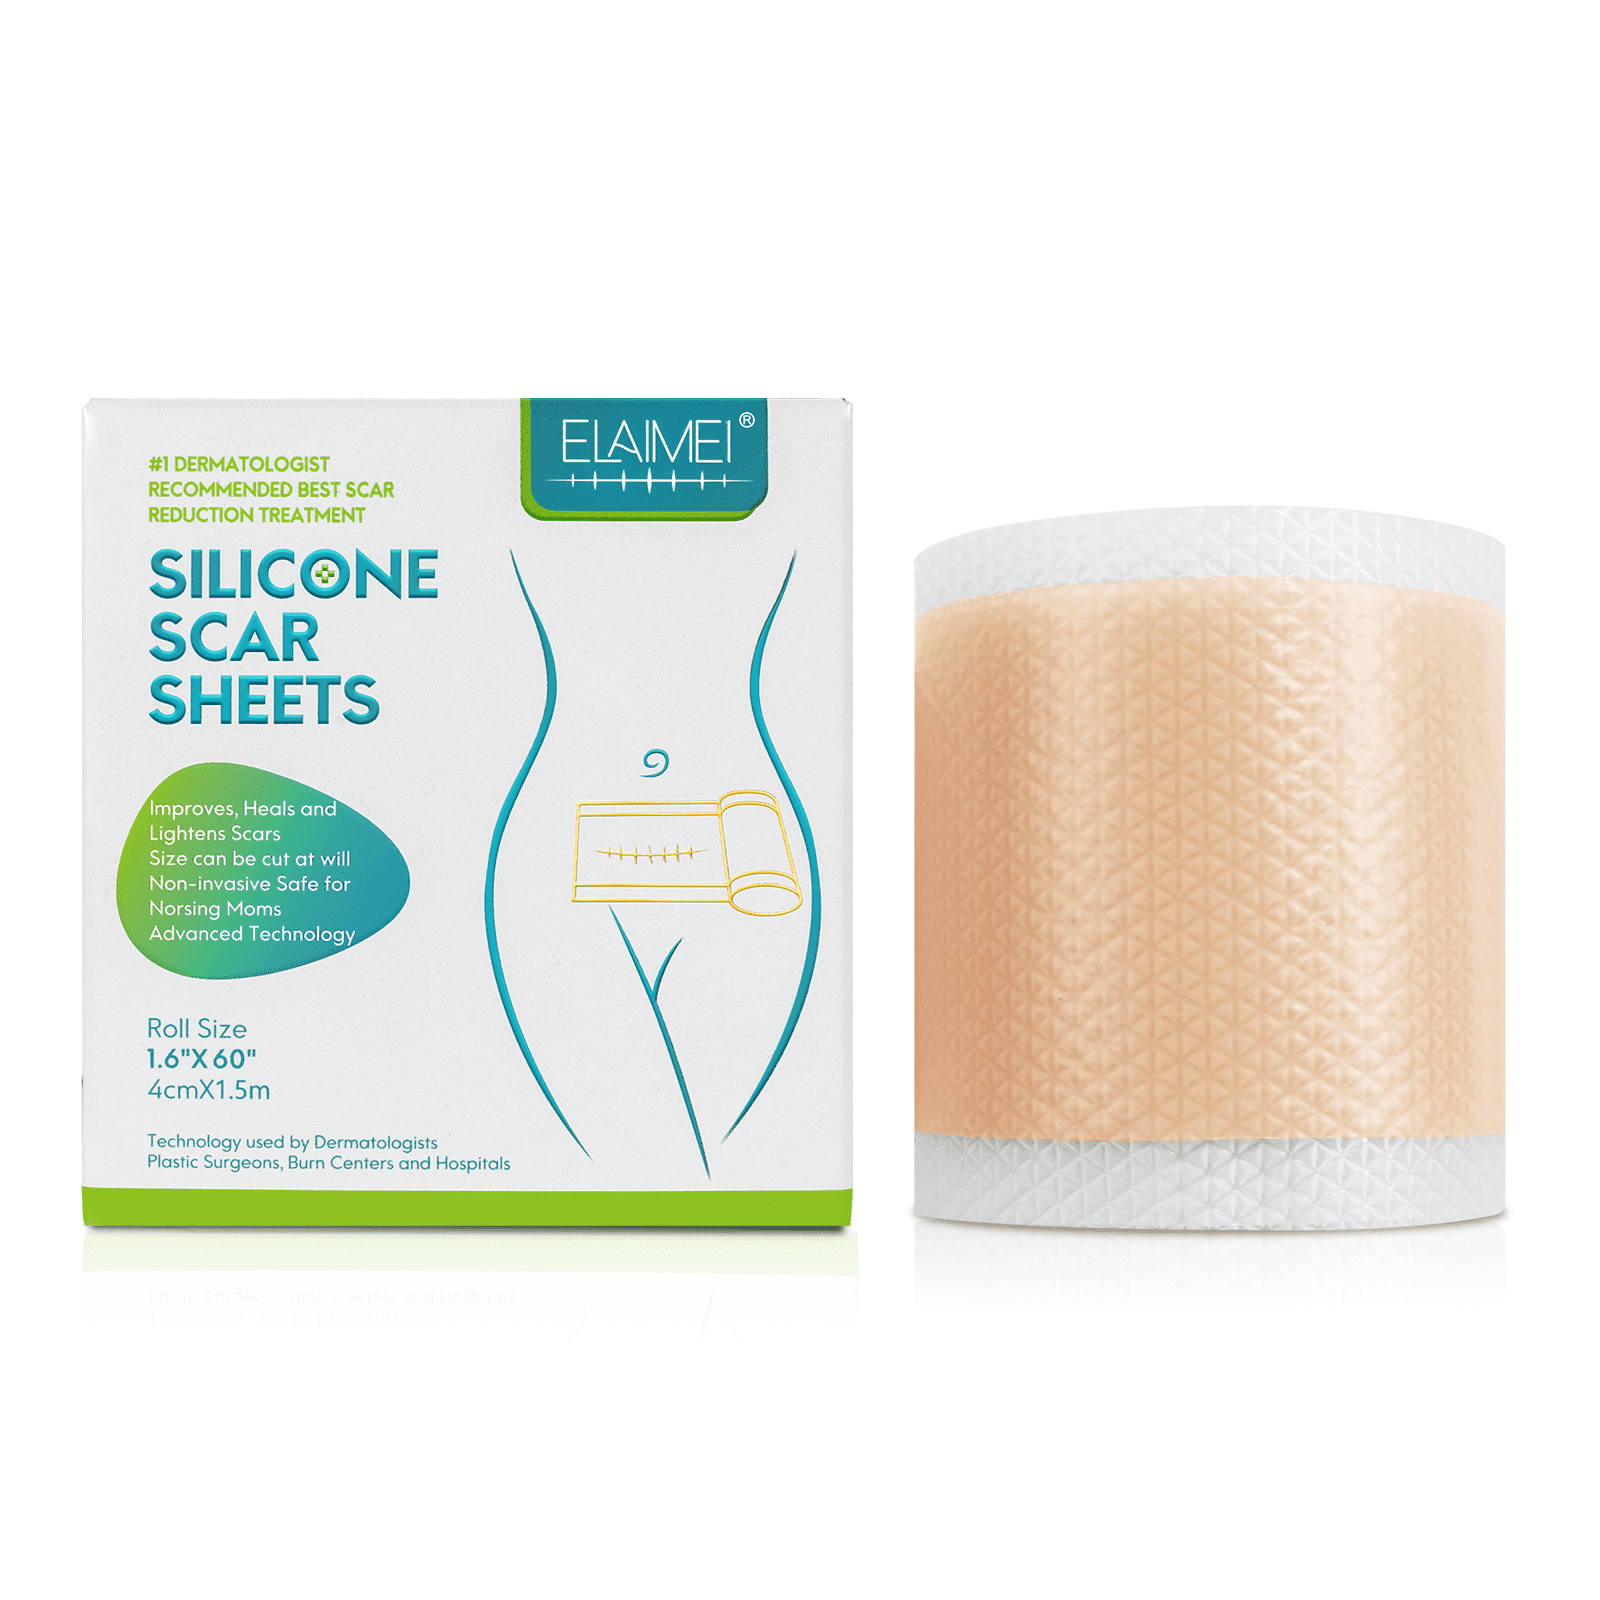 Does Cica Care Silicone Scar Sheets Really Work? – Save Rite Medical